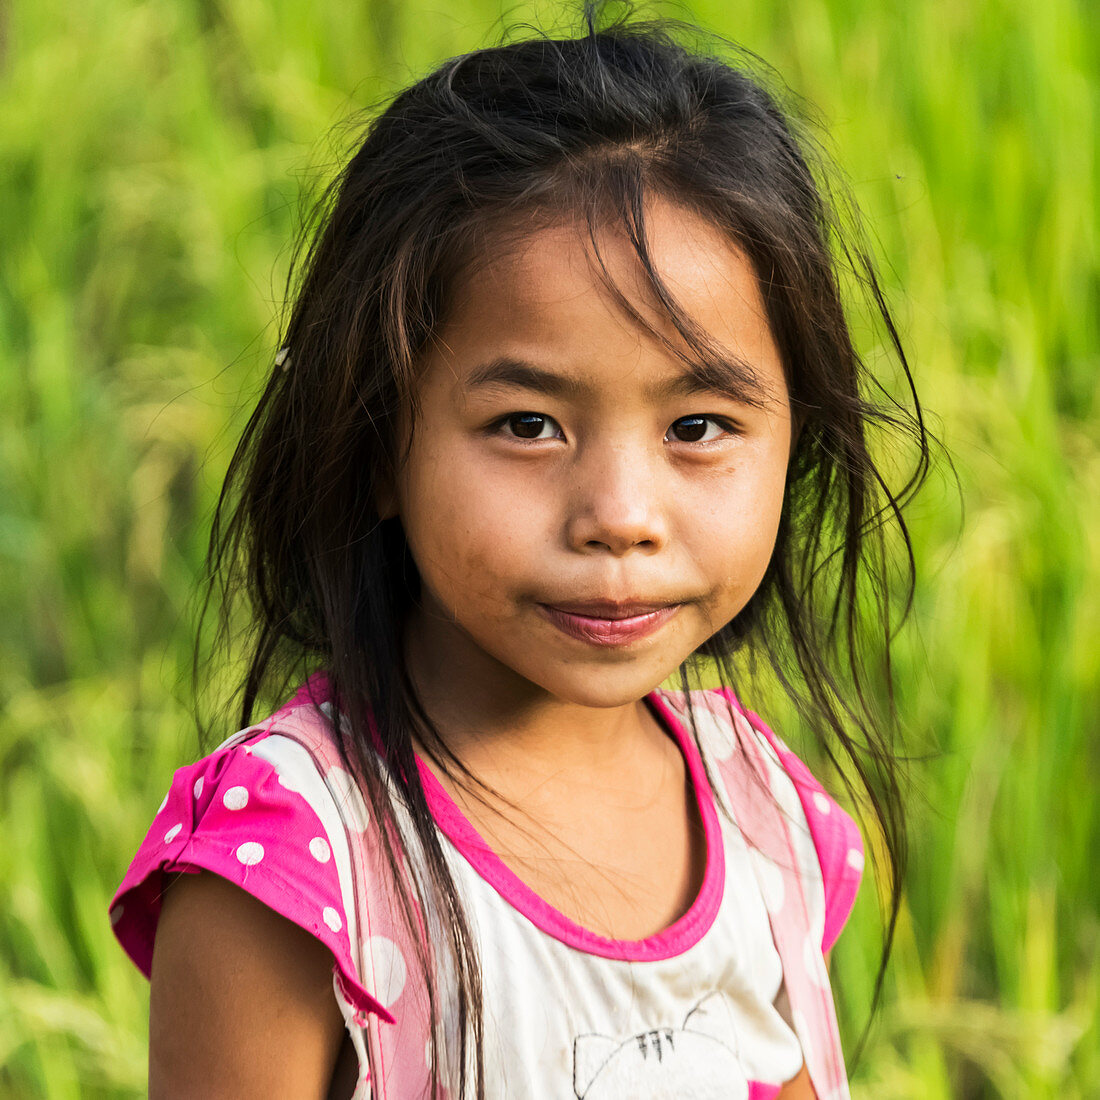 'Portrait of a young South East Asian girl; Luang Prabang Province, Laos'